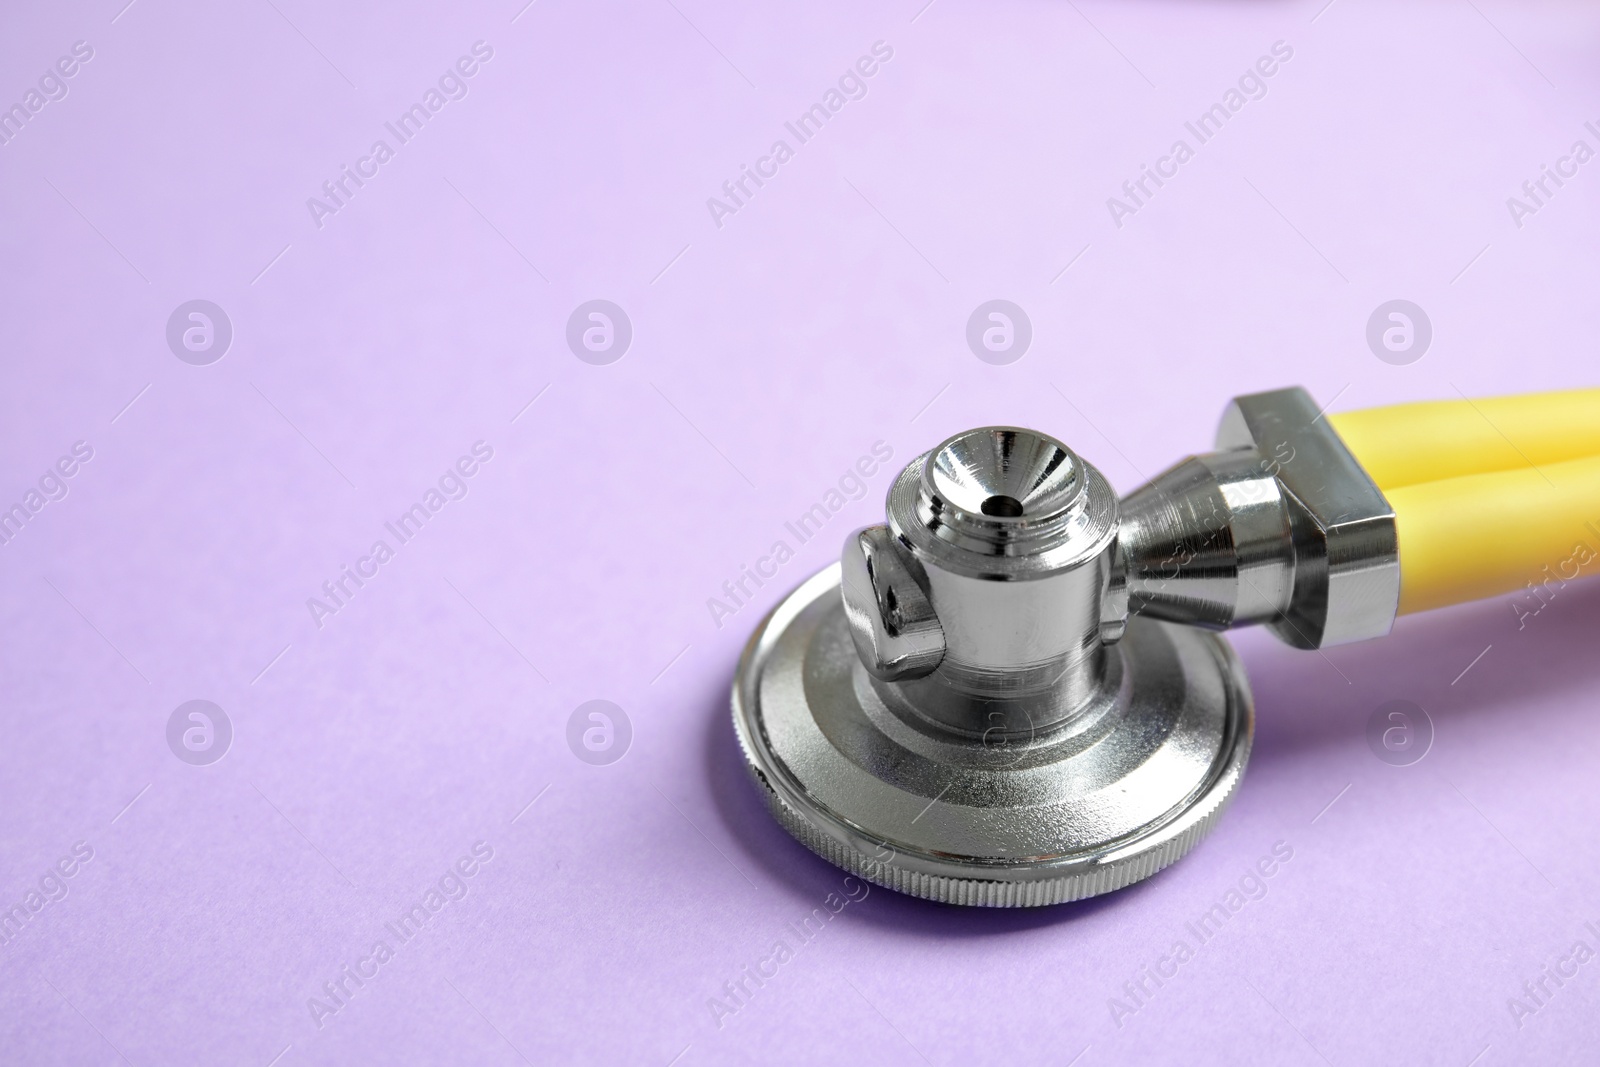 Photo of Stethoscope with space for text on color background, closeup. Medical tool